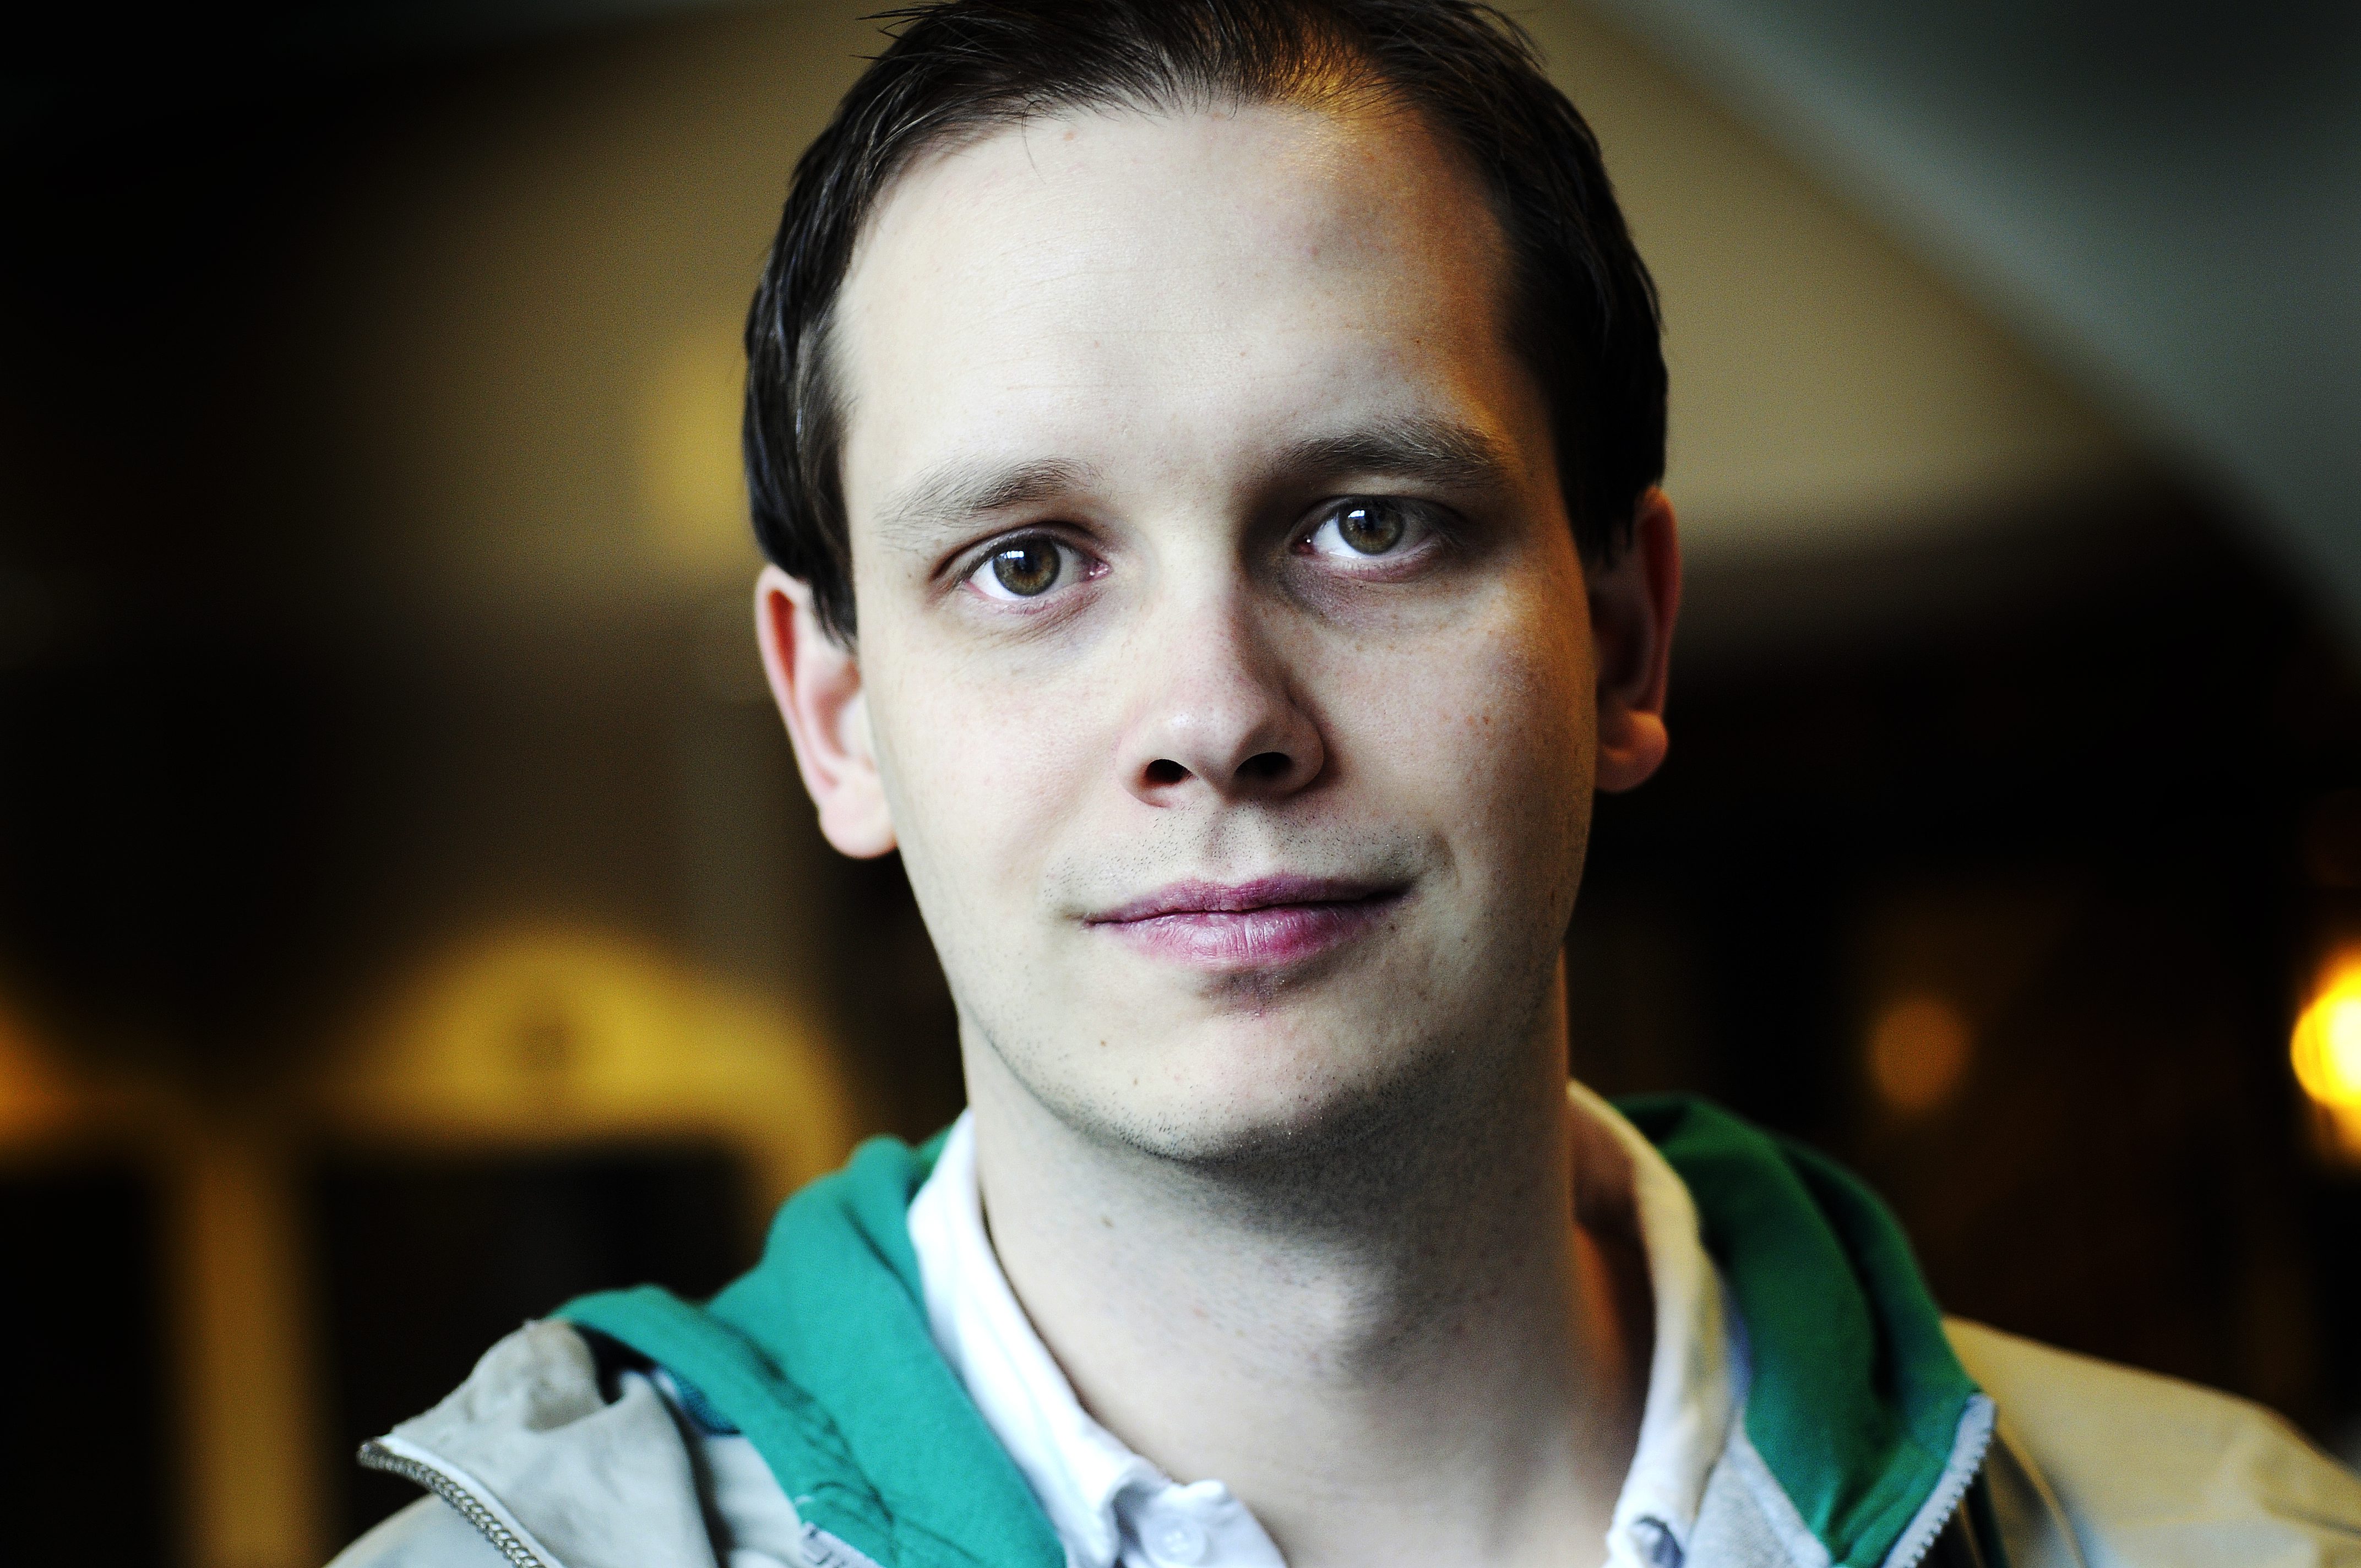 Peter Sunde, The Pirate Bay, Fildelning